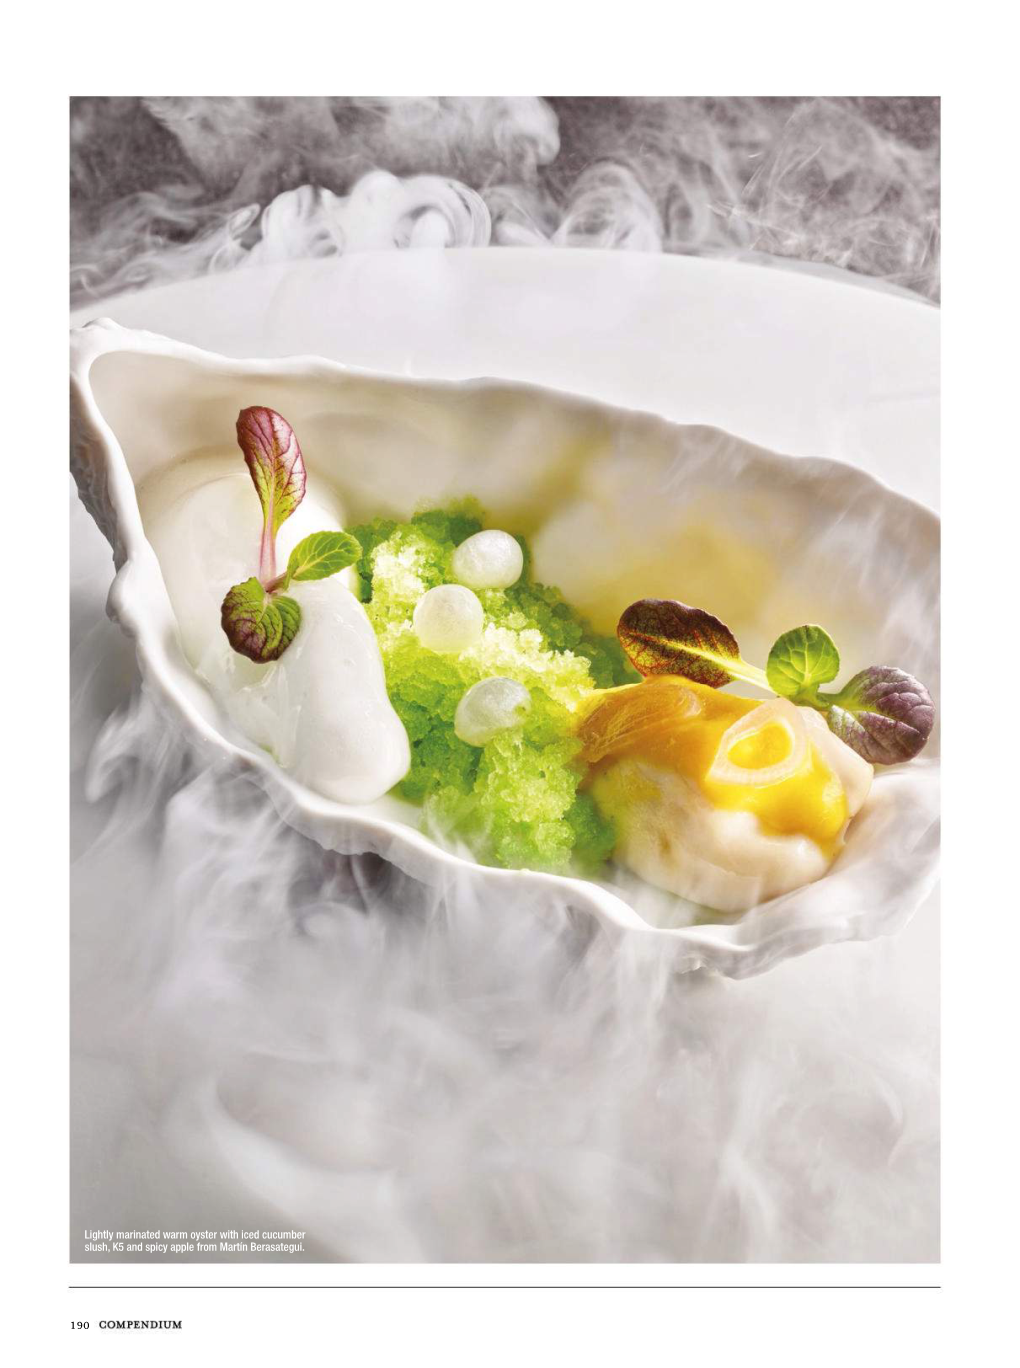 Lightly Marinated Warm Oyster with Iced Cucumber Slush, K5 and Spicy Apple from Martín Berasategui